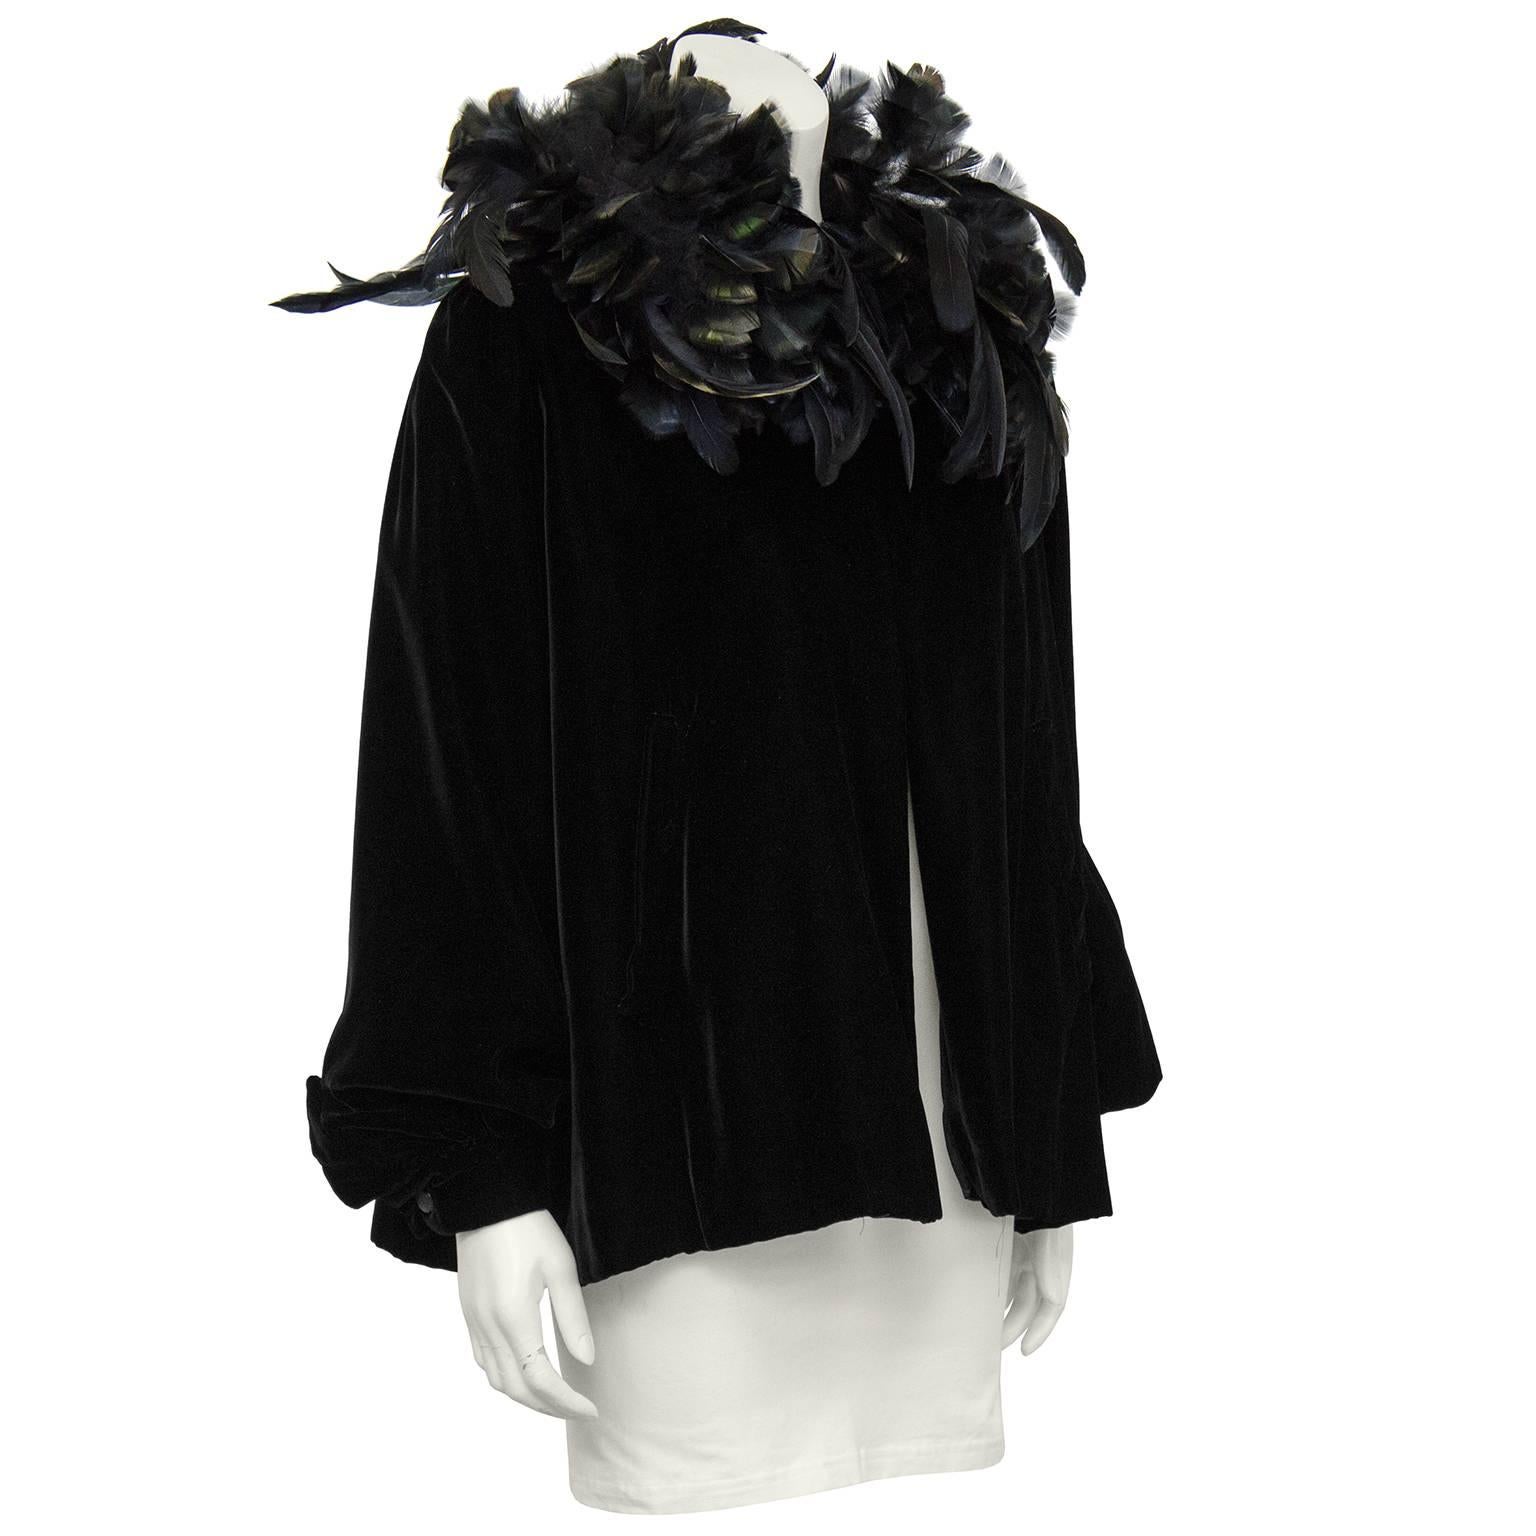 Show stopping and stunning early 1980's Yves Saint Laurent jet black velvet swing jacket. Decorated with a neck full of beautiful black feathers with shades of blue and green when light hits. One large hook and eye closure at neck to allow the